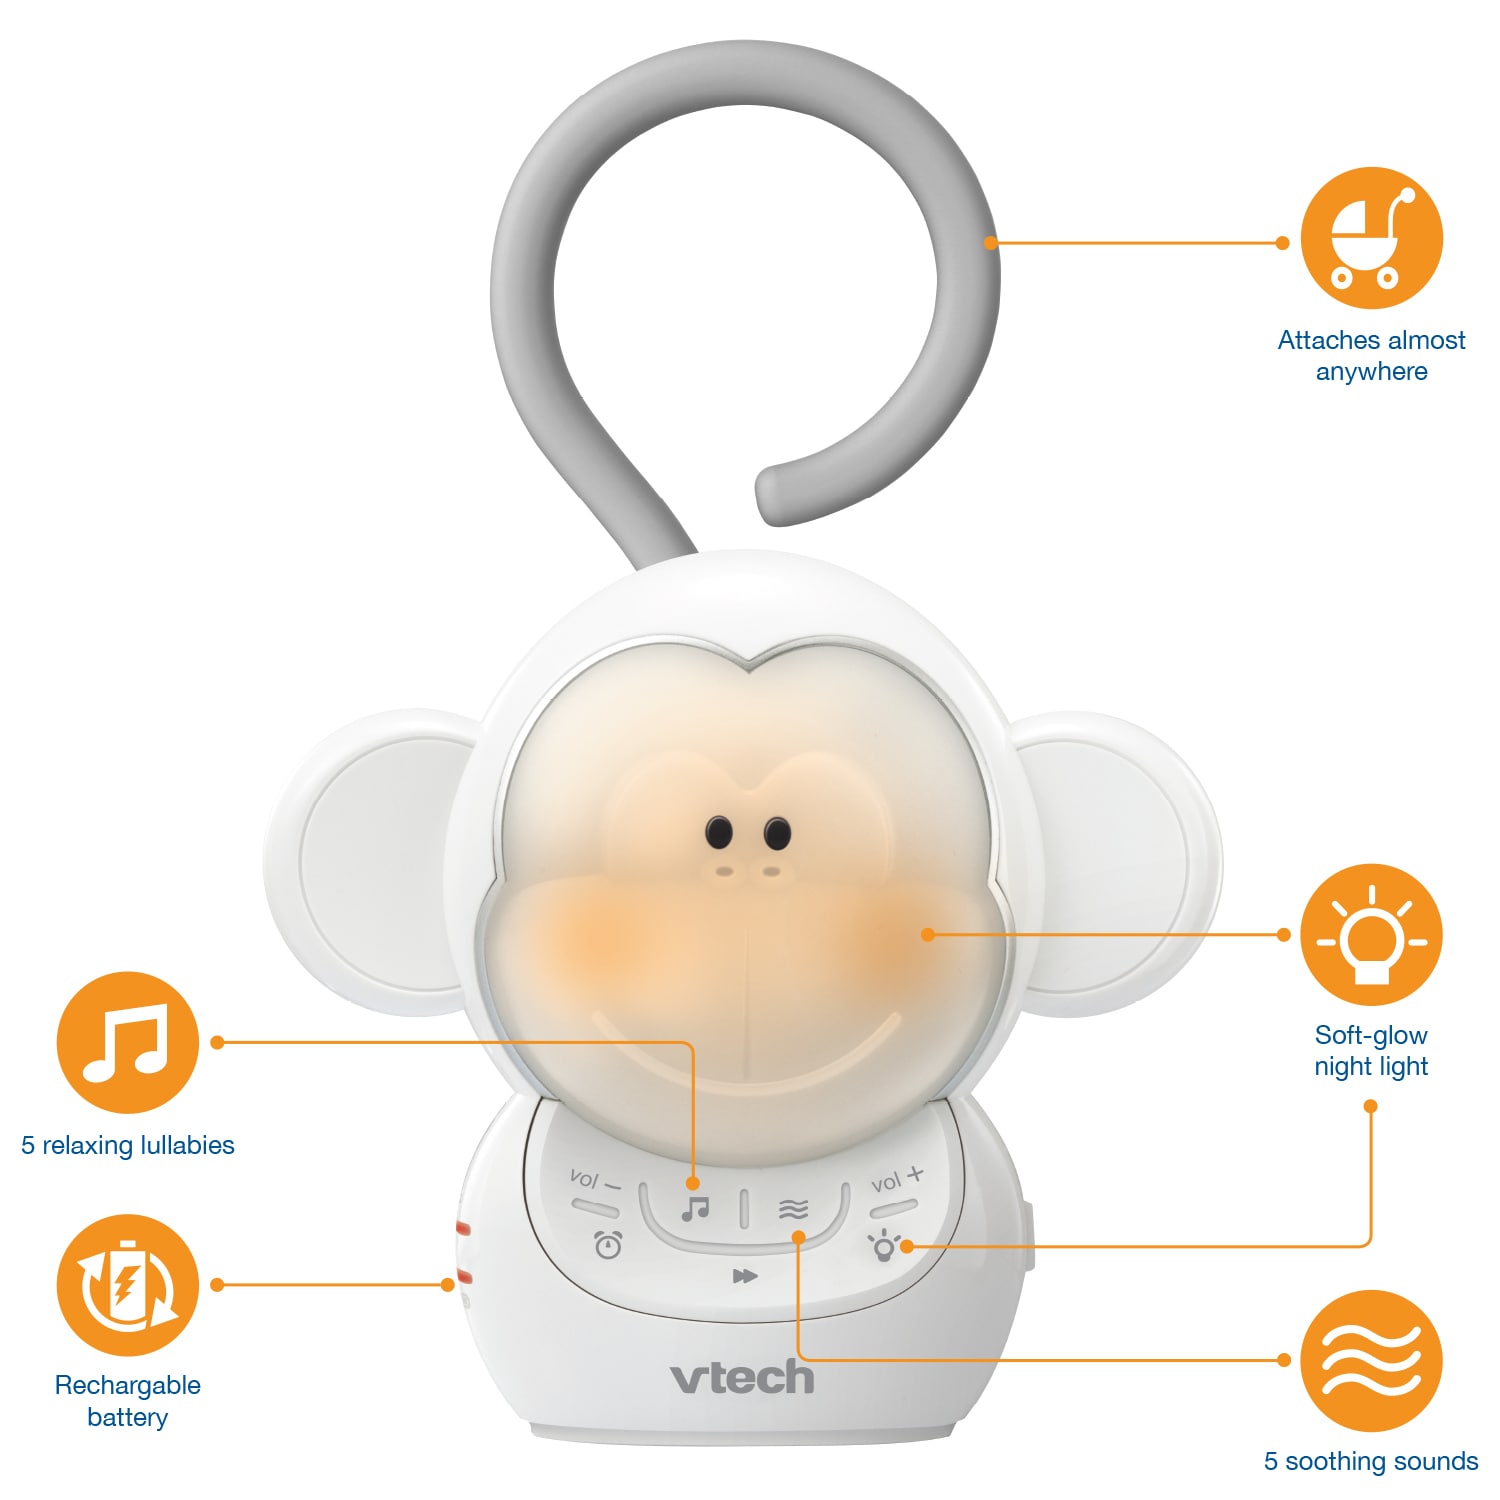 Myla the Monkey® Portable Soother - view 9